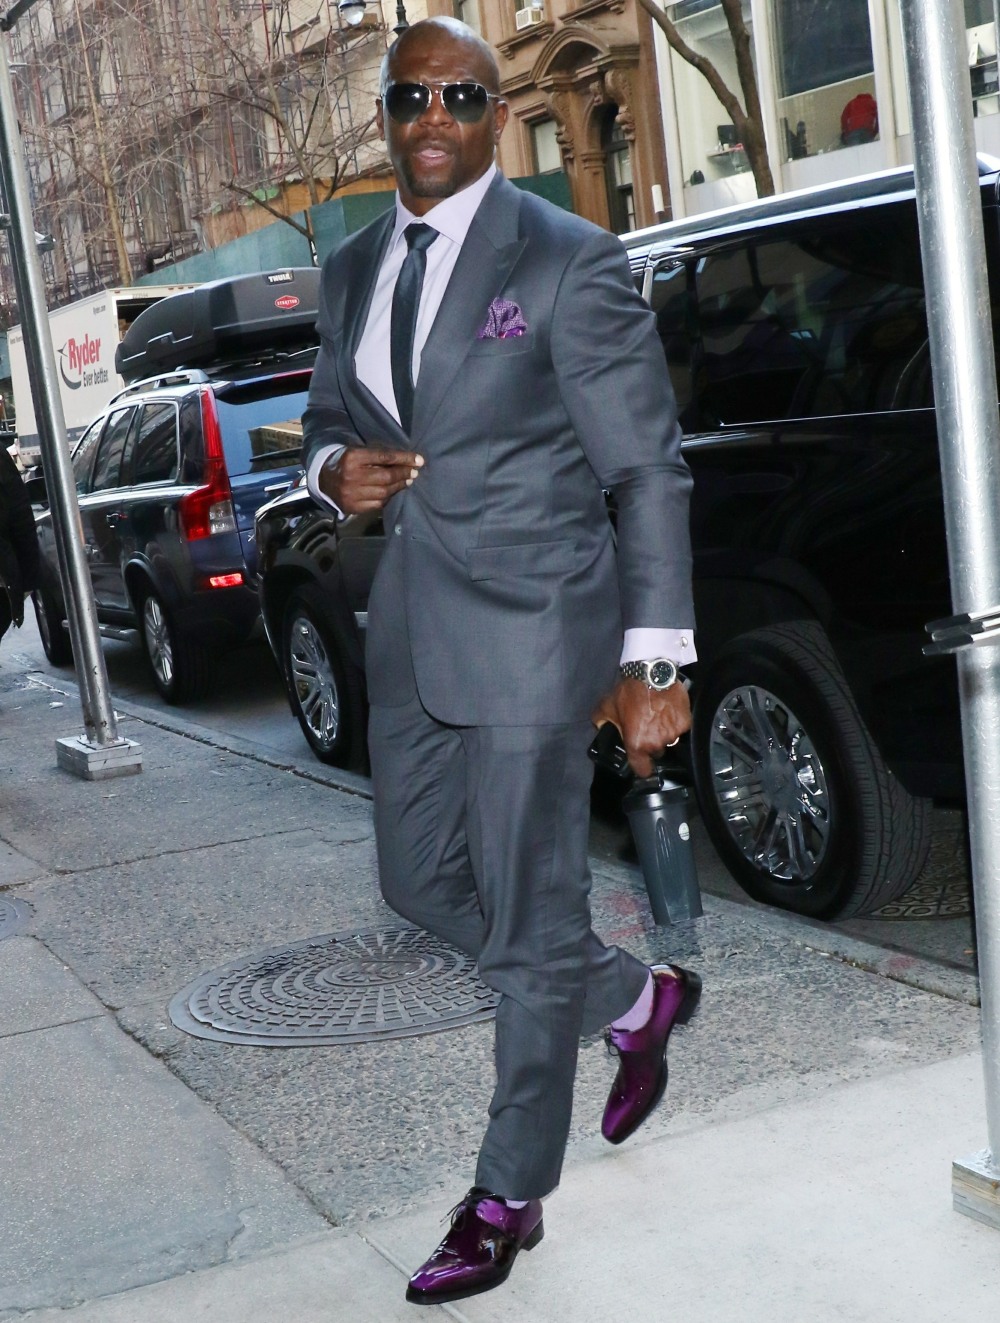 Terry Crews at Buzzfeed looking dapper and wearing fancy shoes!